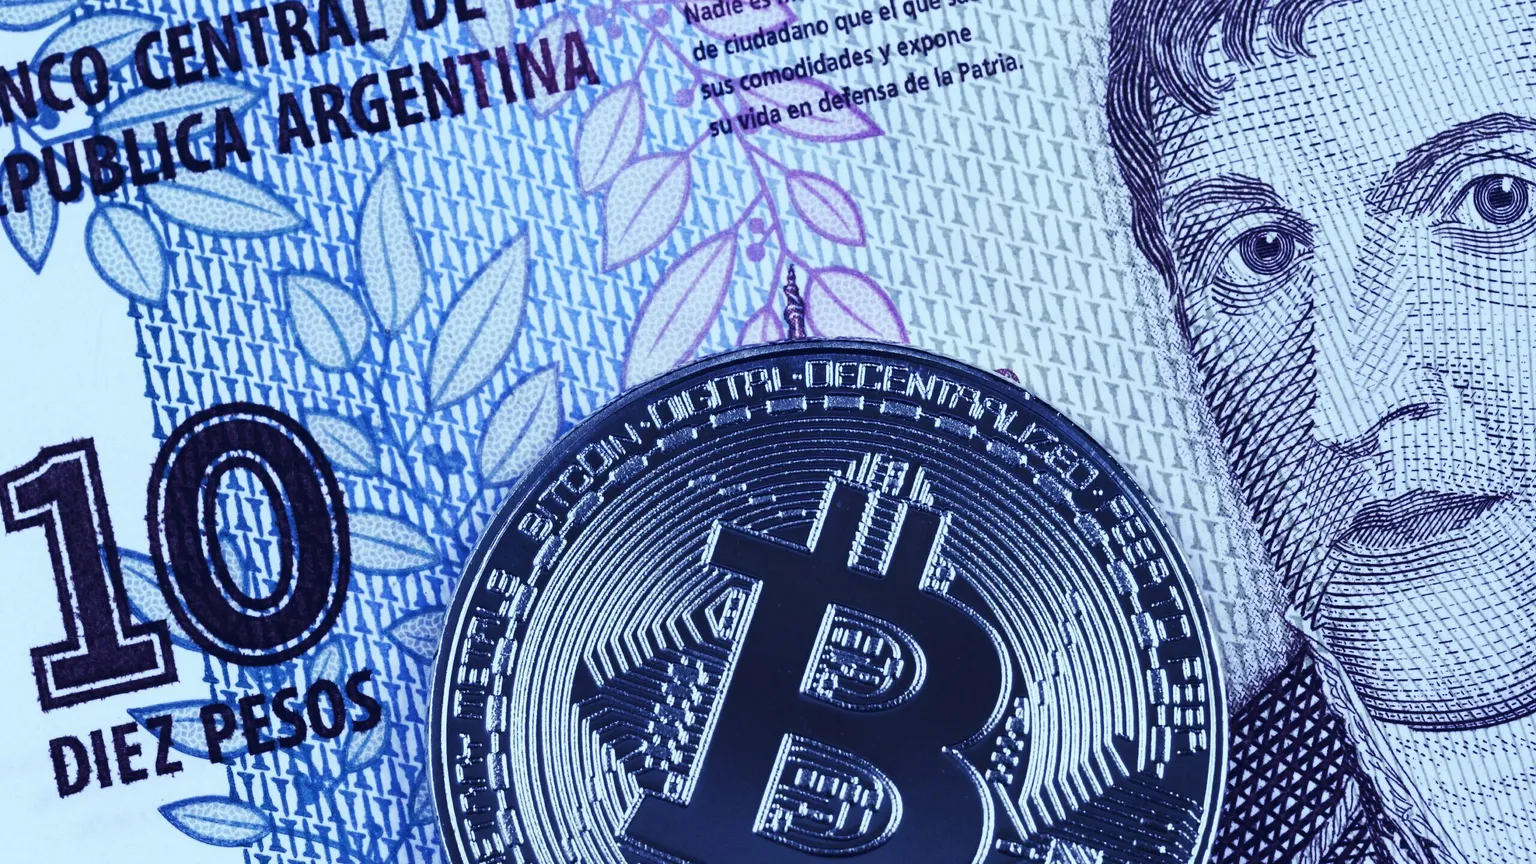 Bitcoin in Argentina. Image: Shutterstock